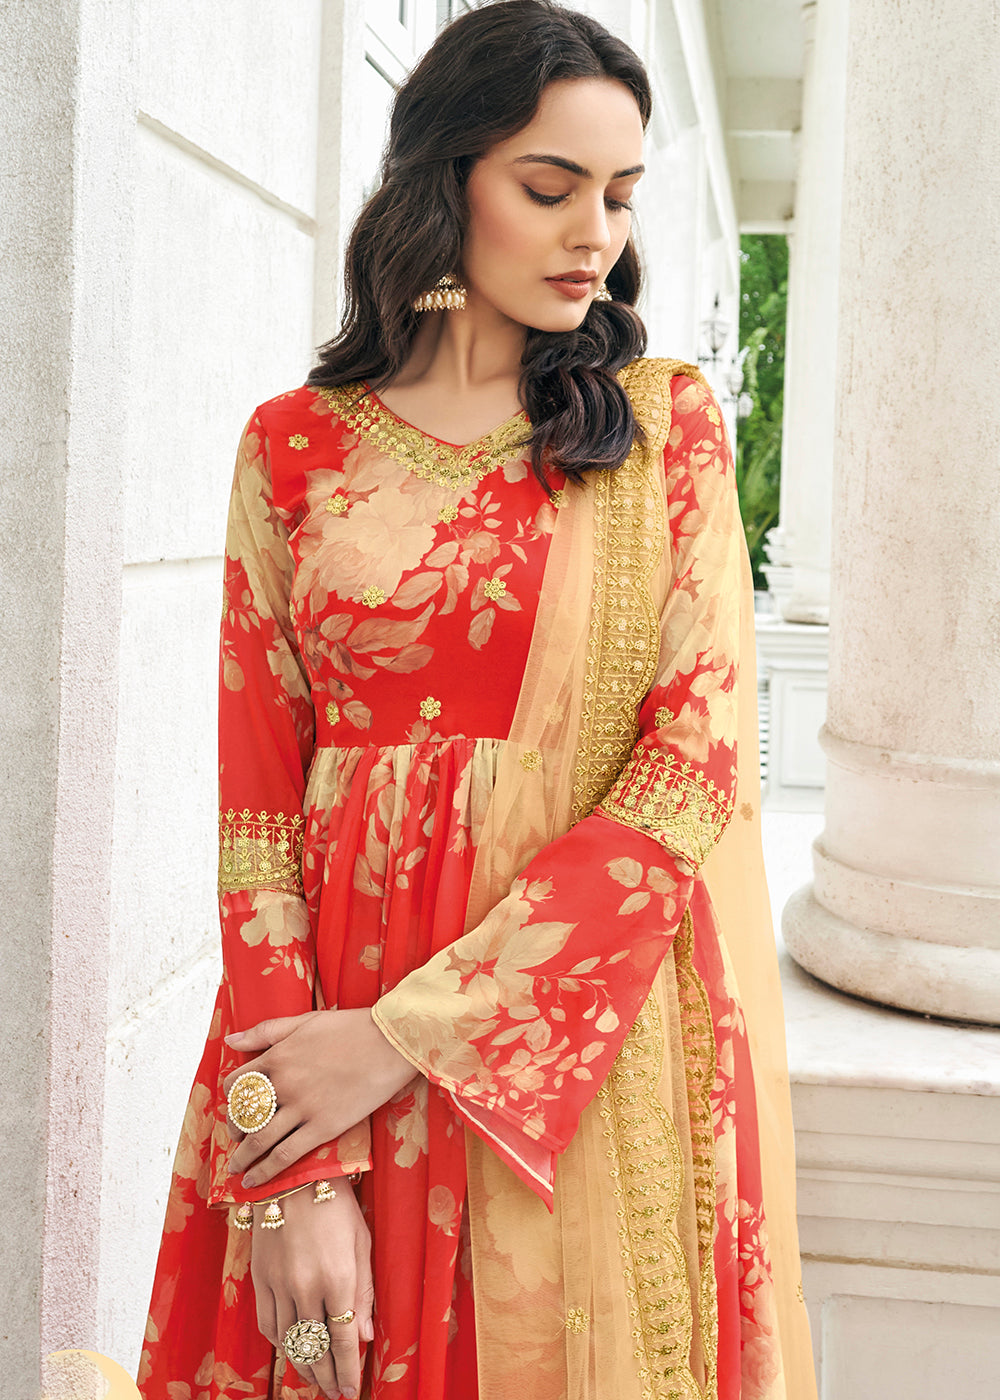 Shop Now Floral Printed Memorable Red Trendy Sharara Suit for Wedding Online at Empress Clothing in USA, UK, Canada & Worldwide.